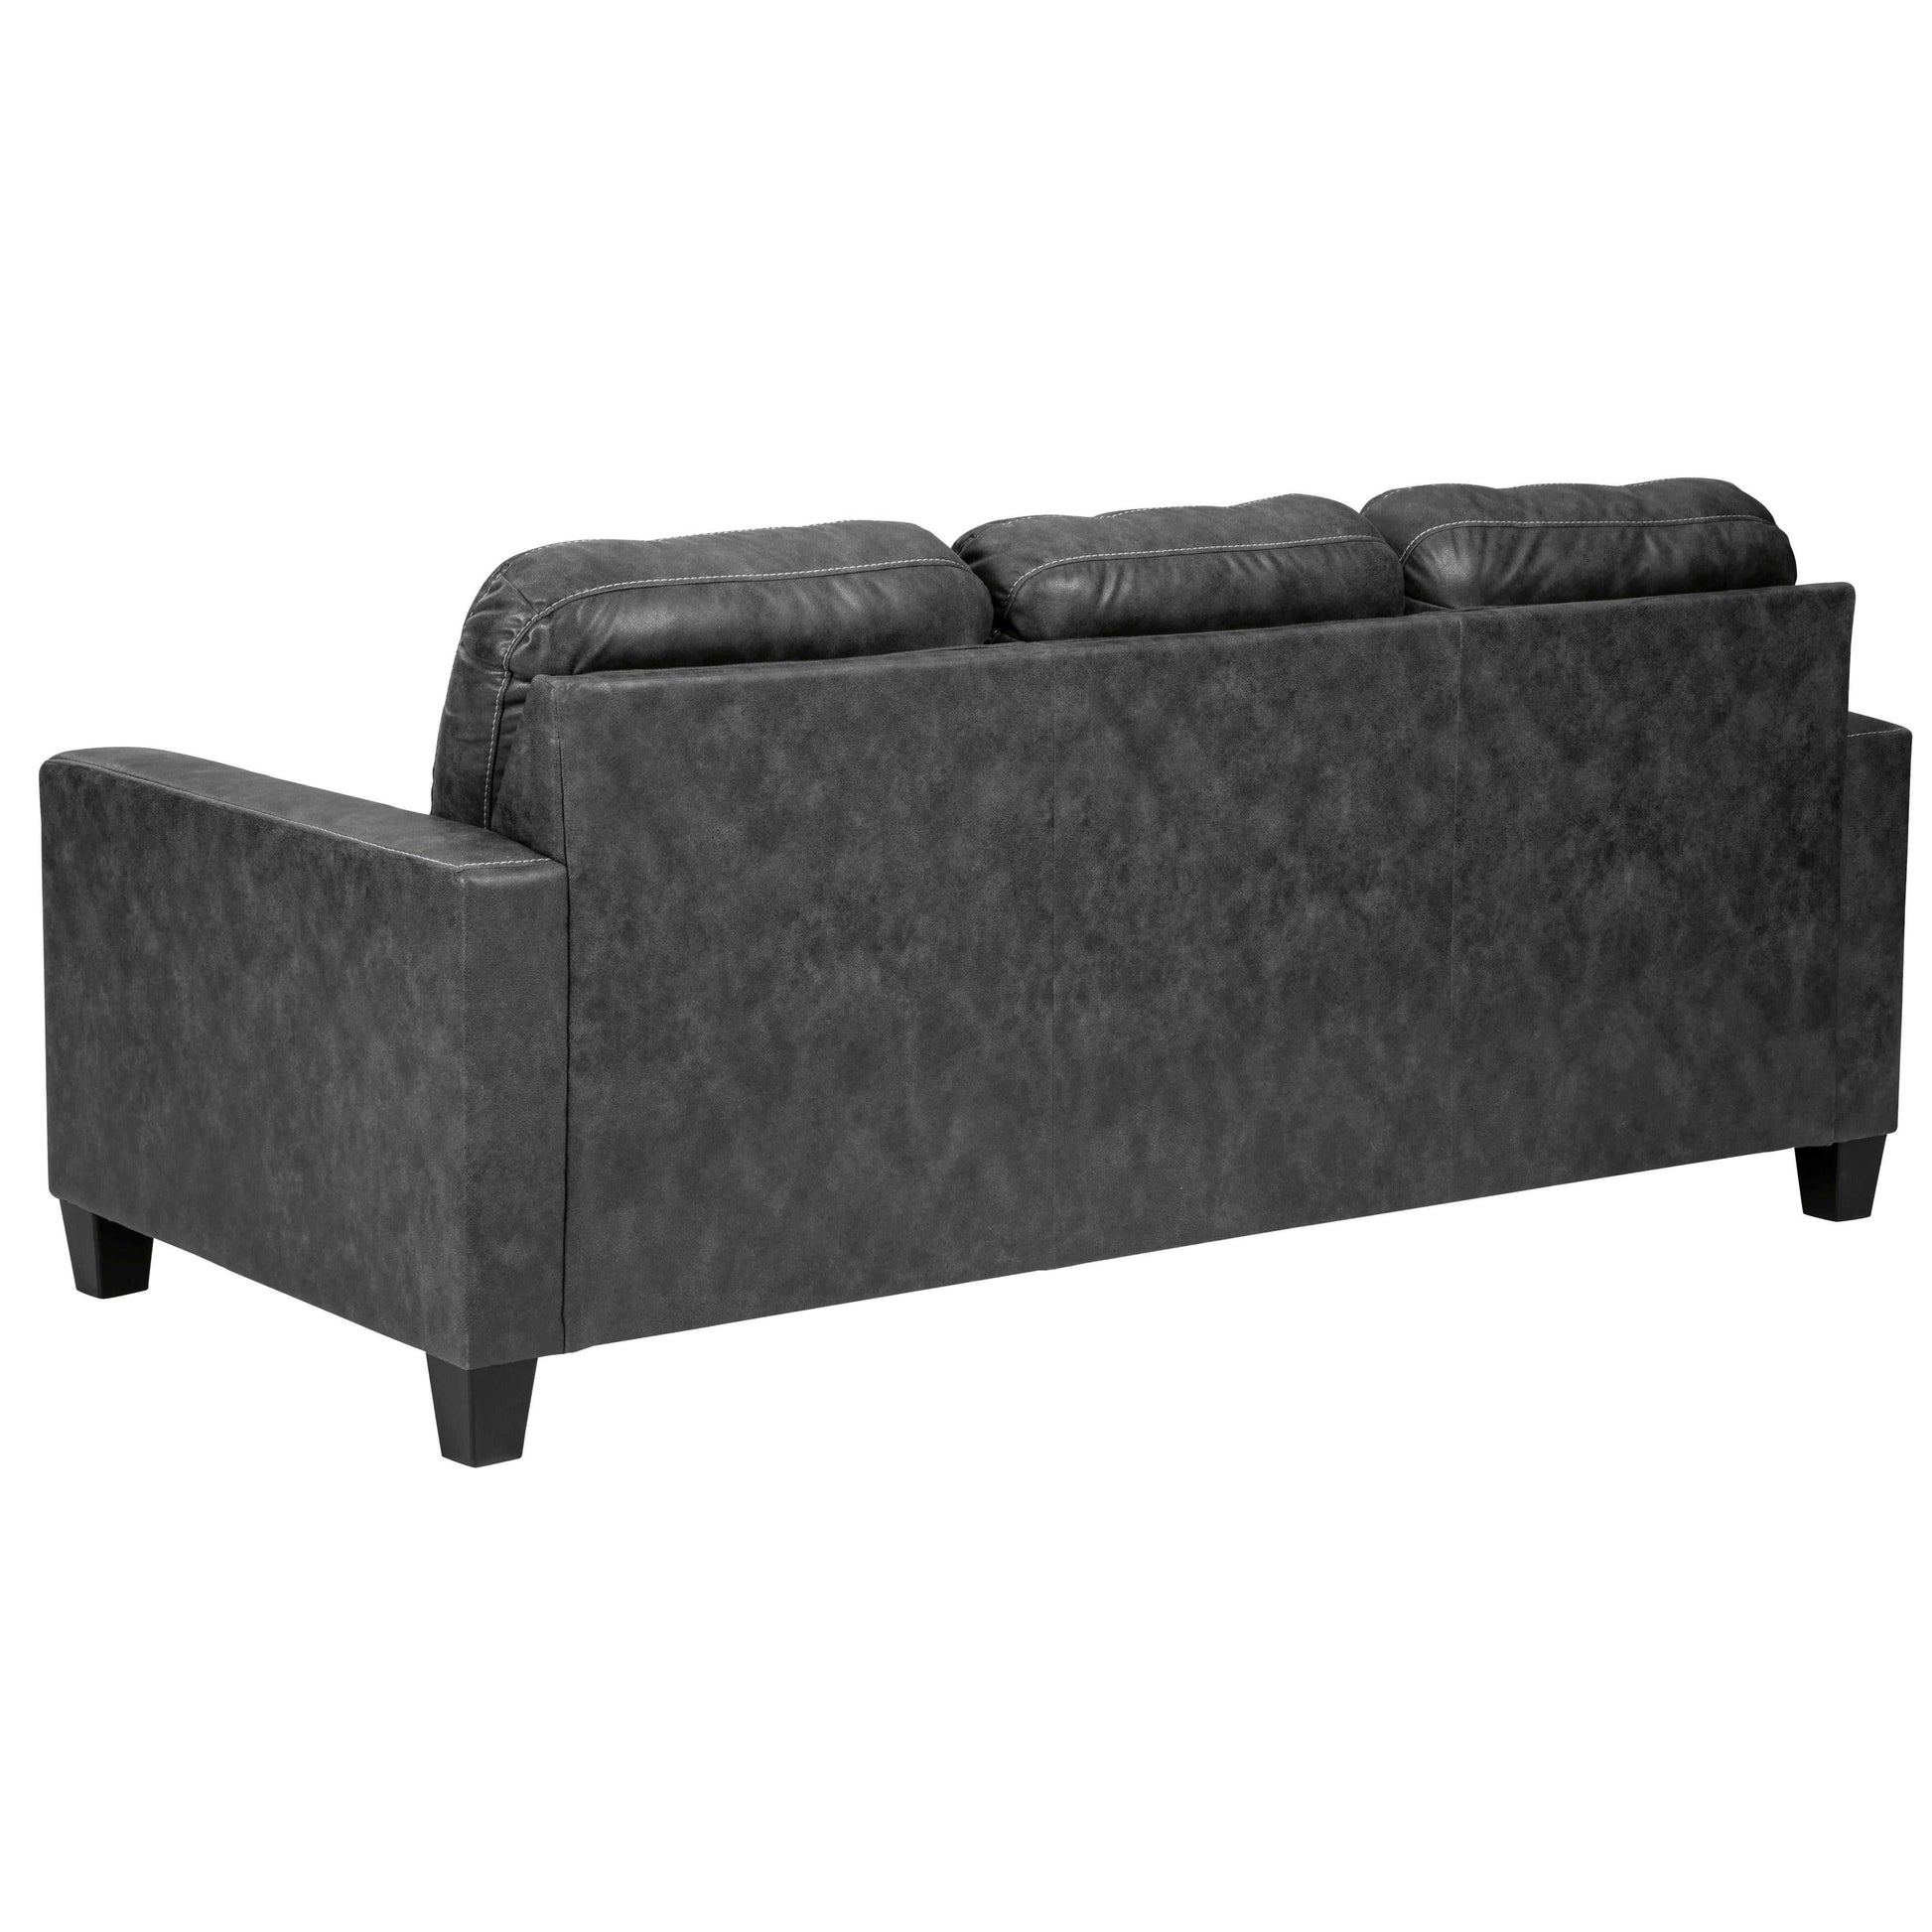 Benchcraft Venaldi Leather Look Sectional 9150118